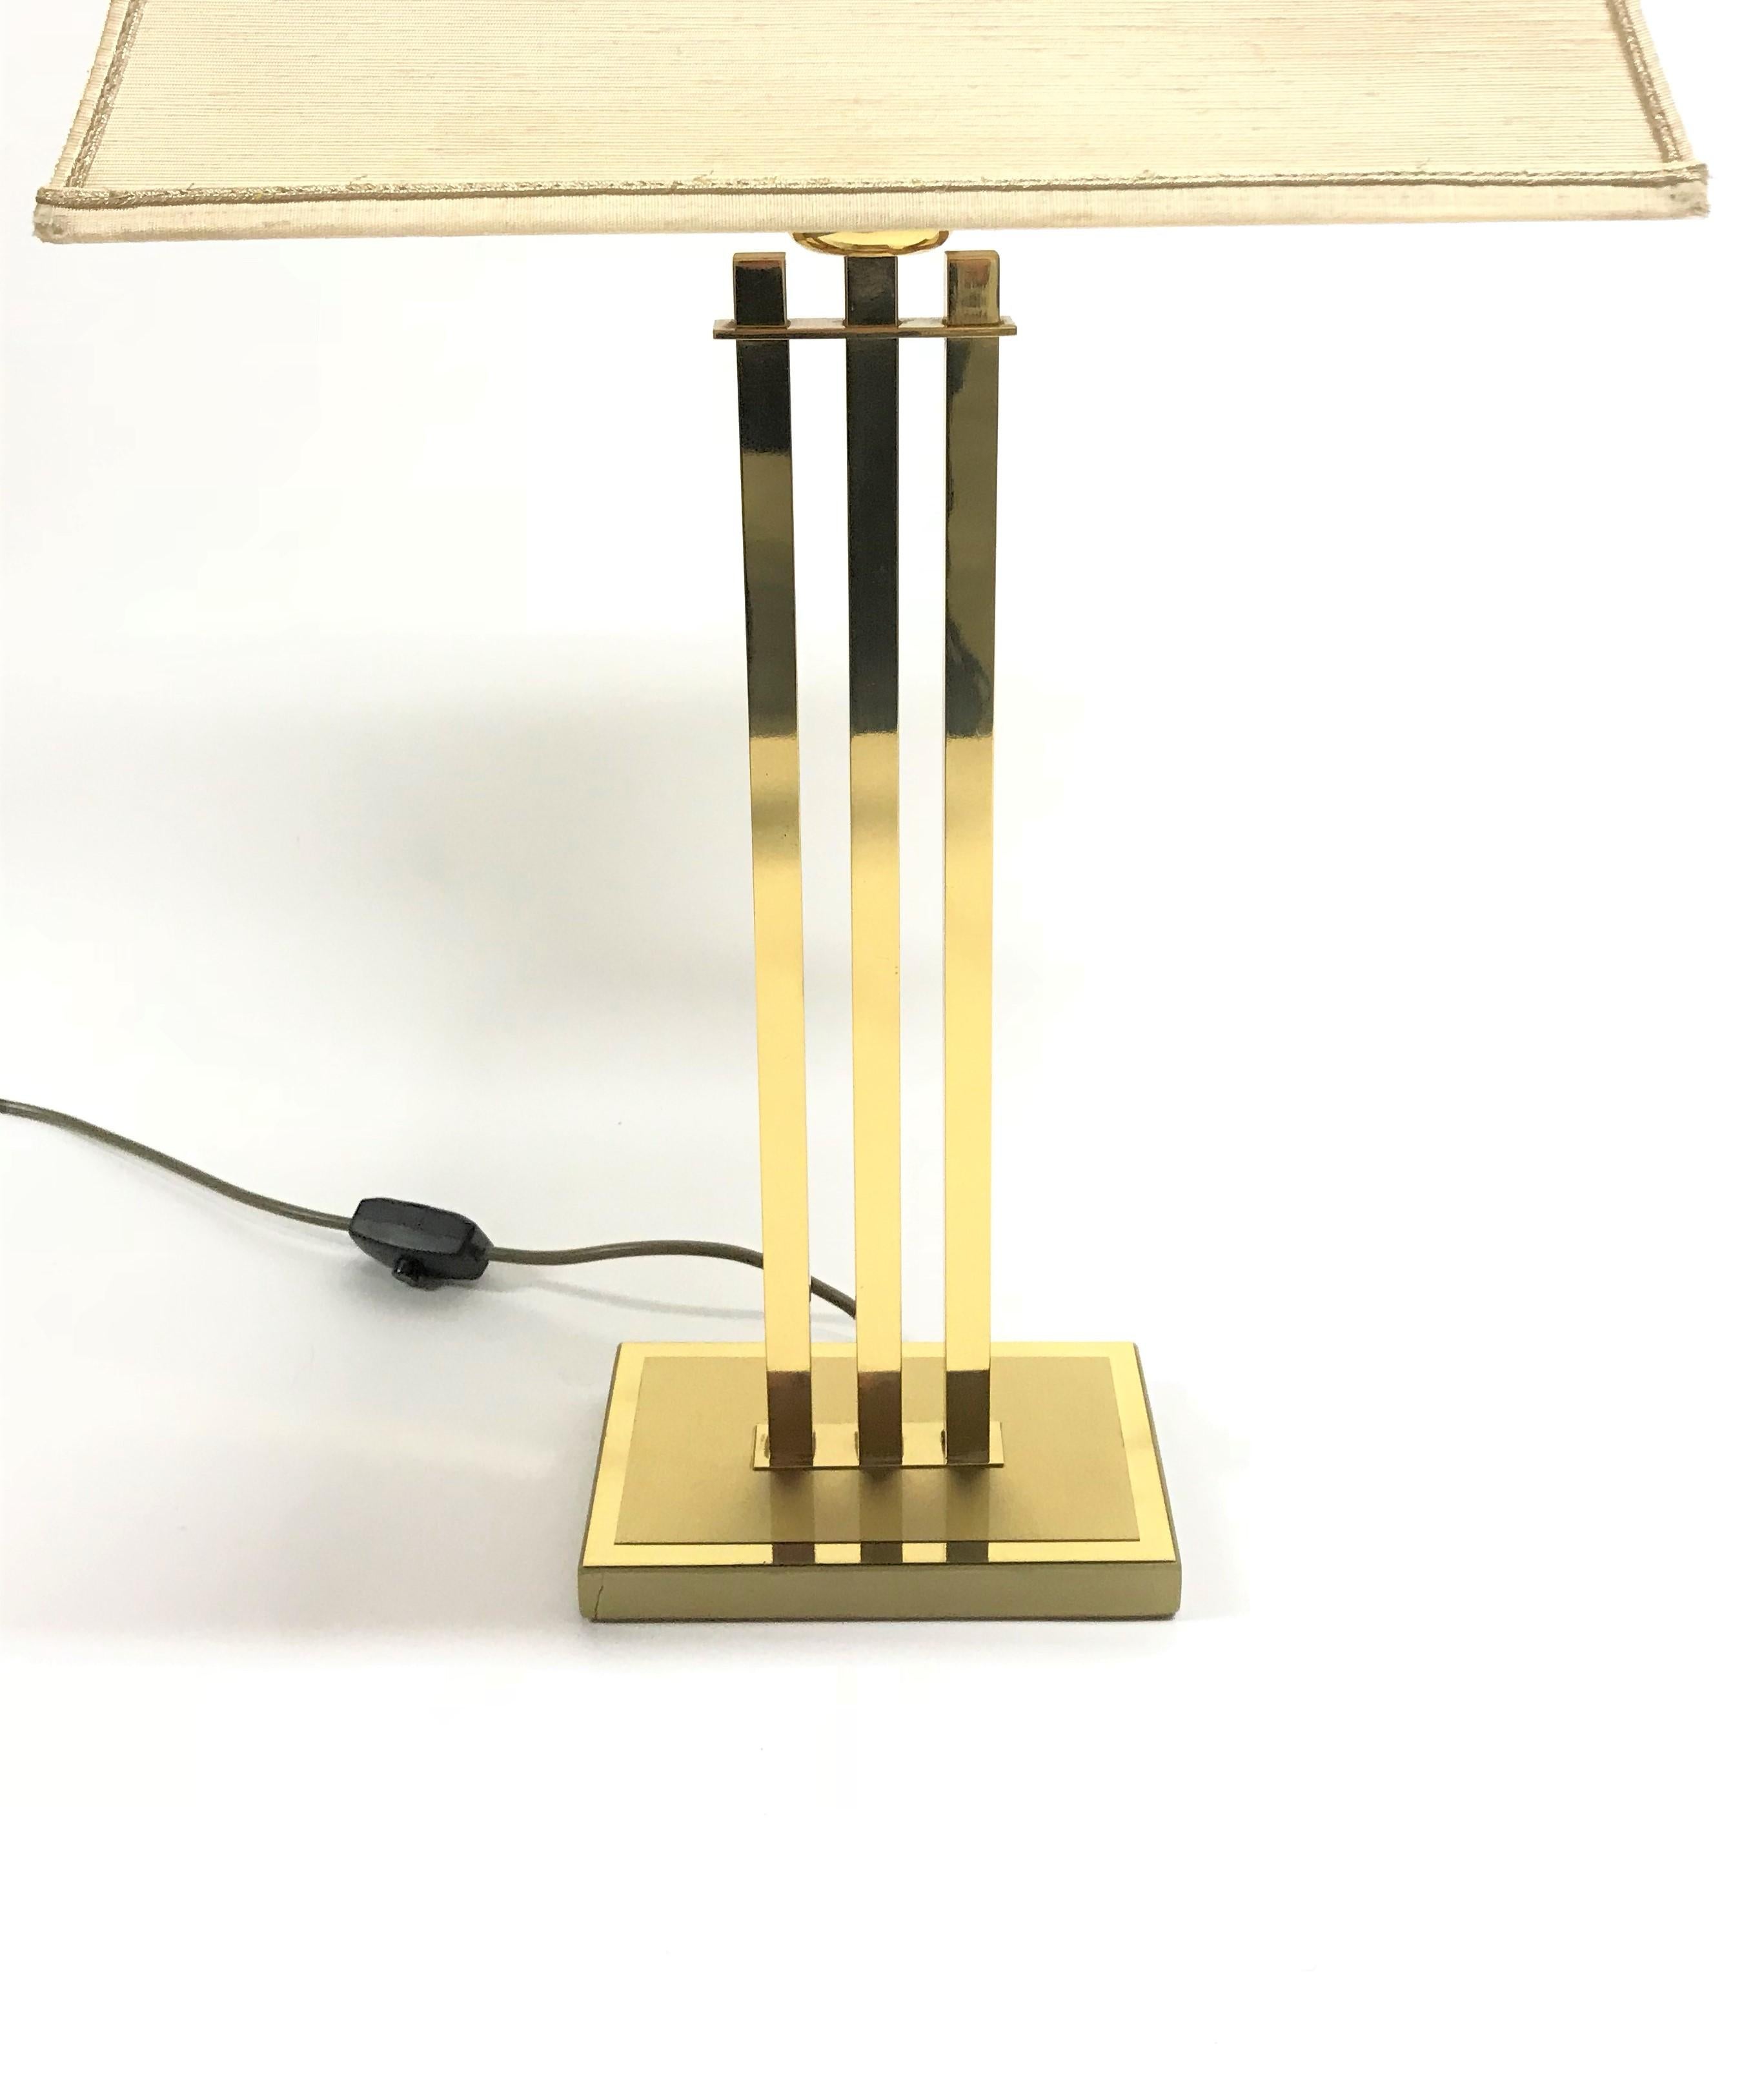 Belgian Vintage Brass Table Lamp by Willy Rizzo for Deknudt, 1970s